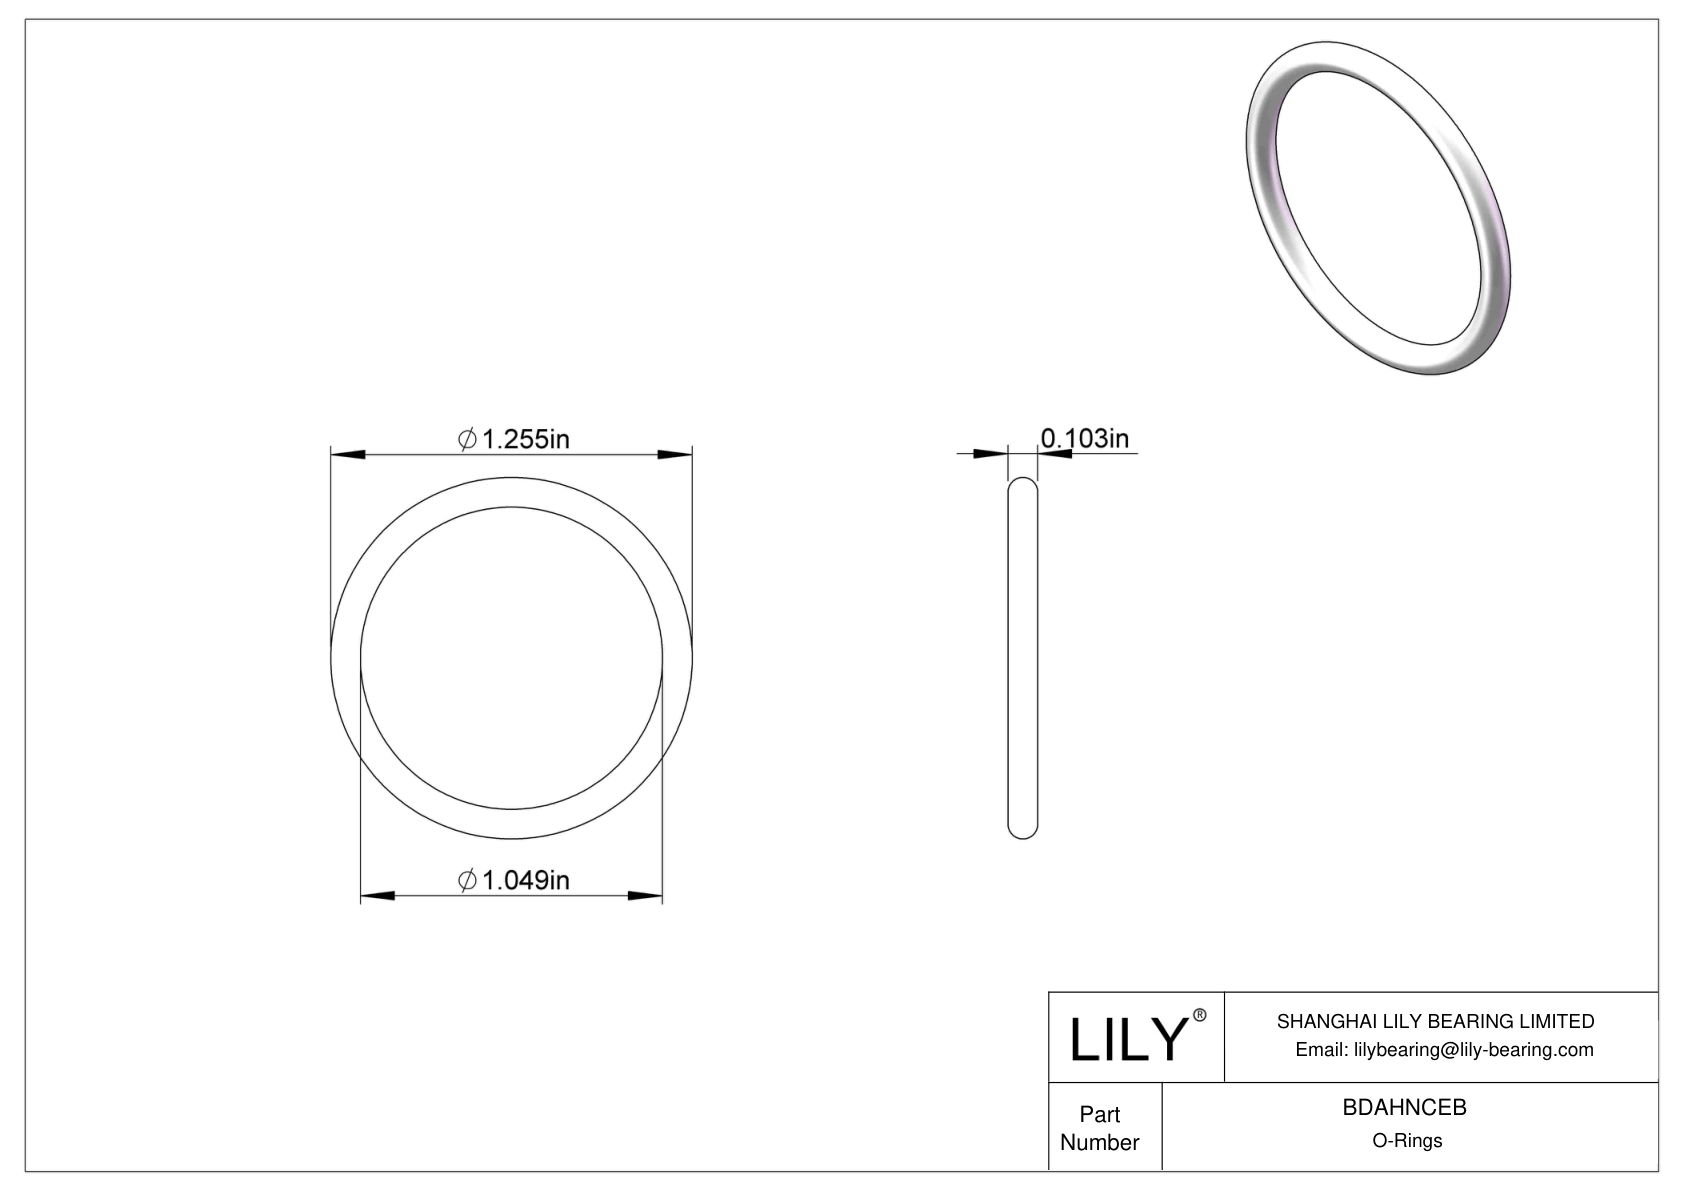 BDAHNCEB Oil Resistant O-Rings Round cad drawing